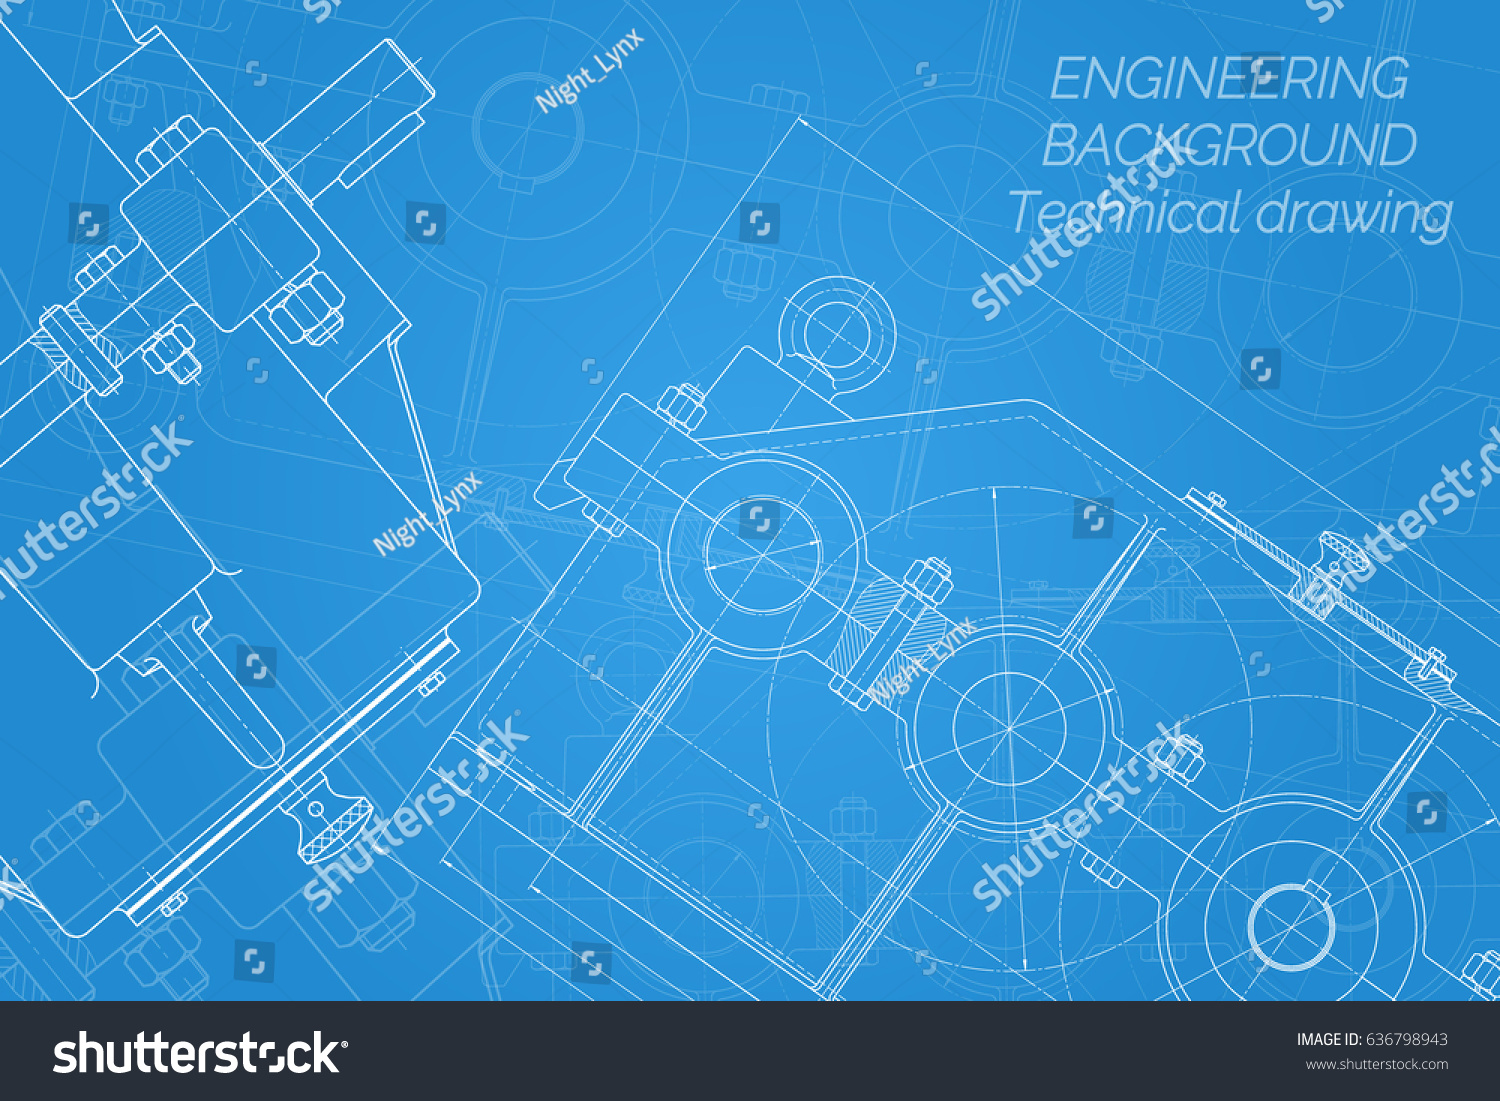 stock vector mechanical engineering drawings on blue background reducer technical design cover blueprint 636798943